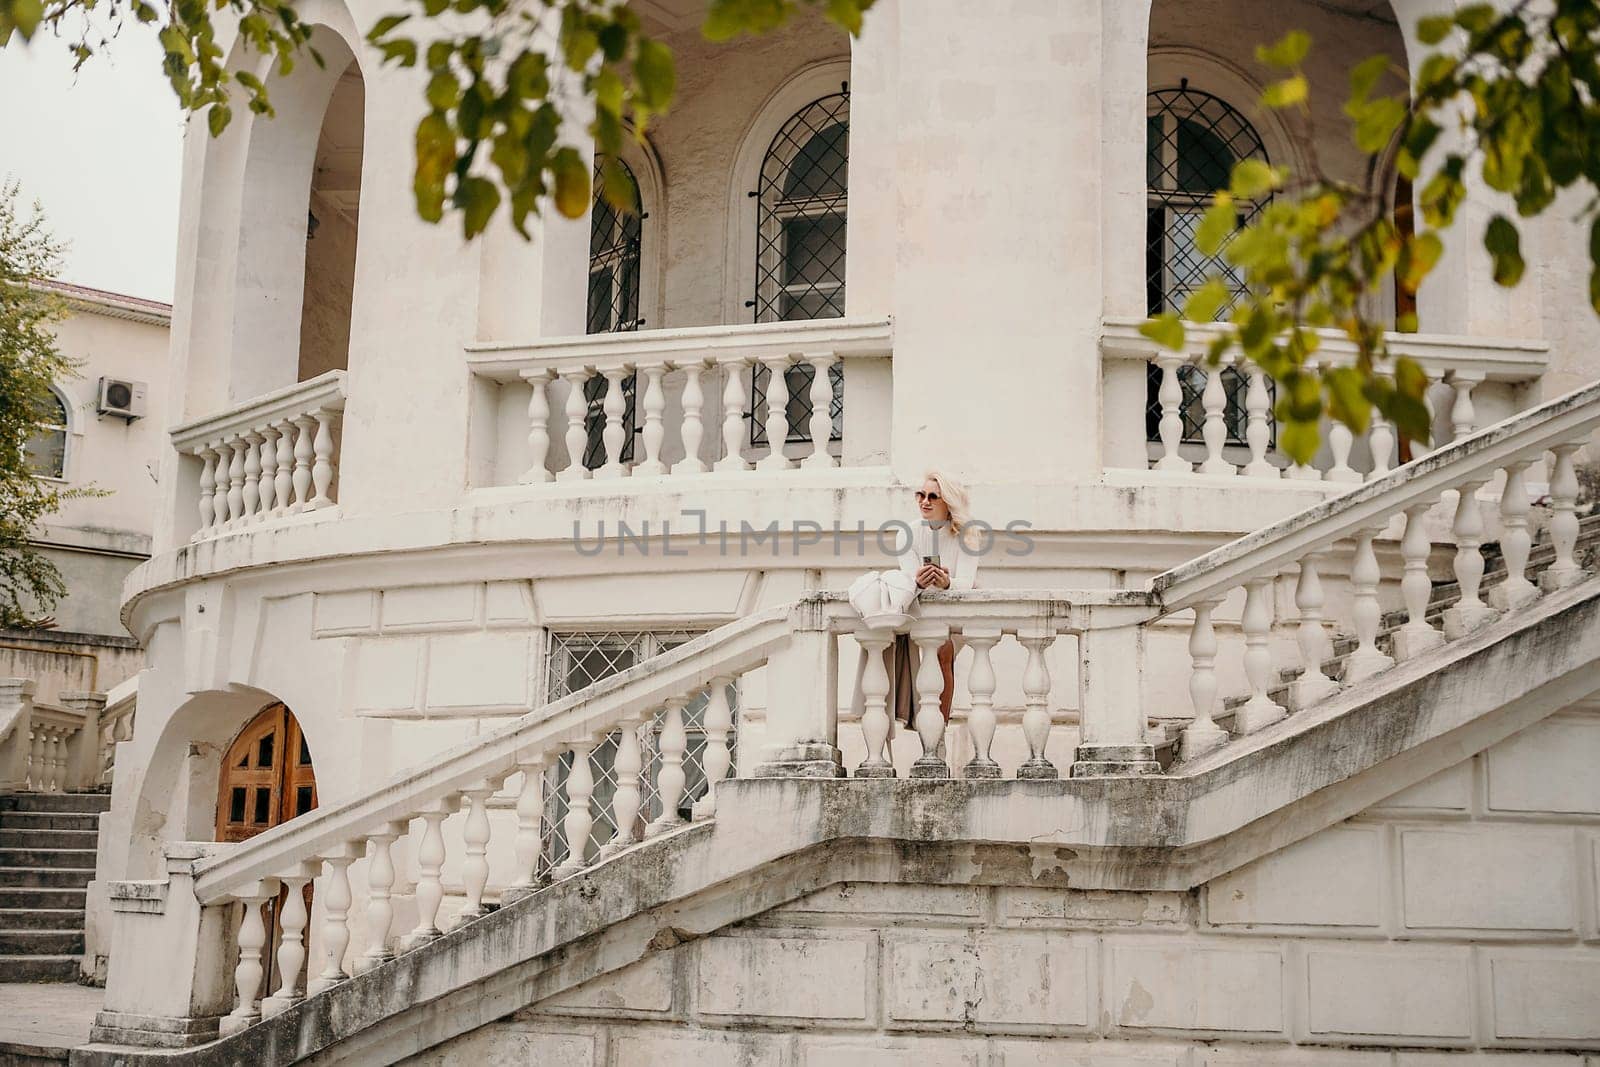 A woman is standing on a balcony of a building with a white hat on. The balcony has a railing and a staircase leading up to it